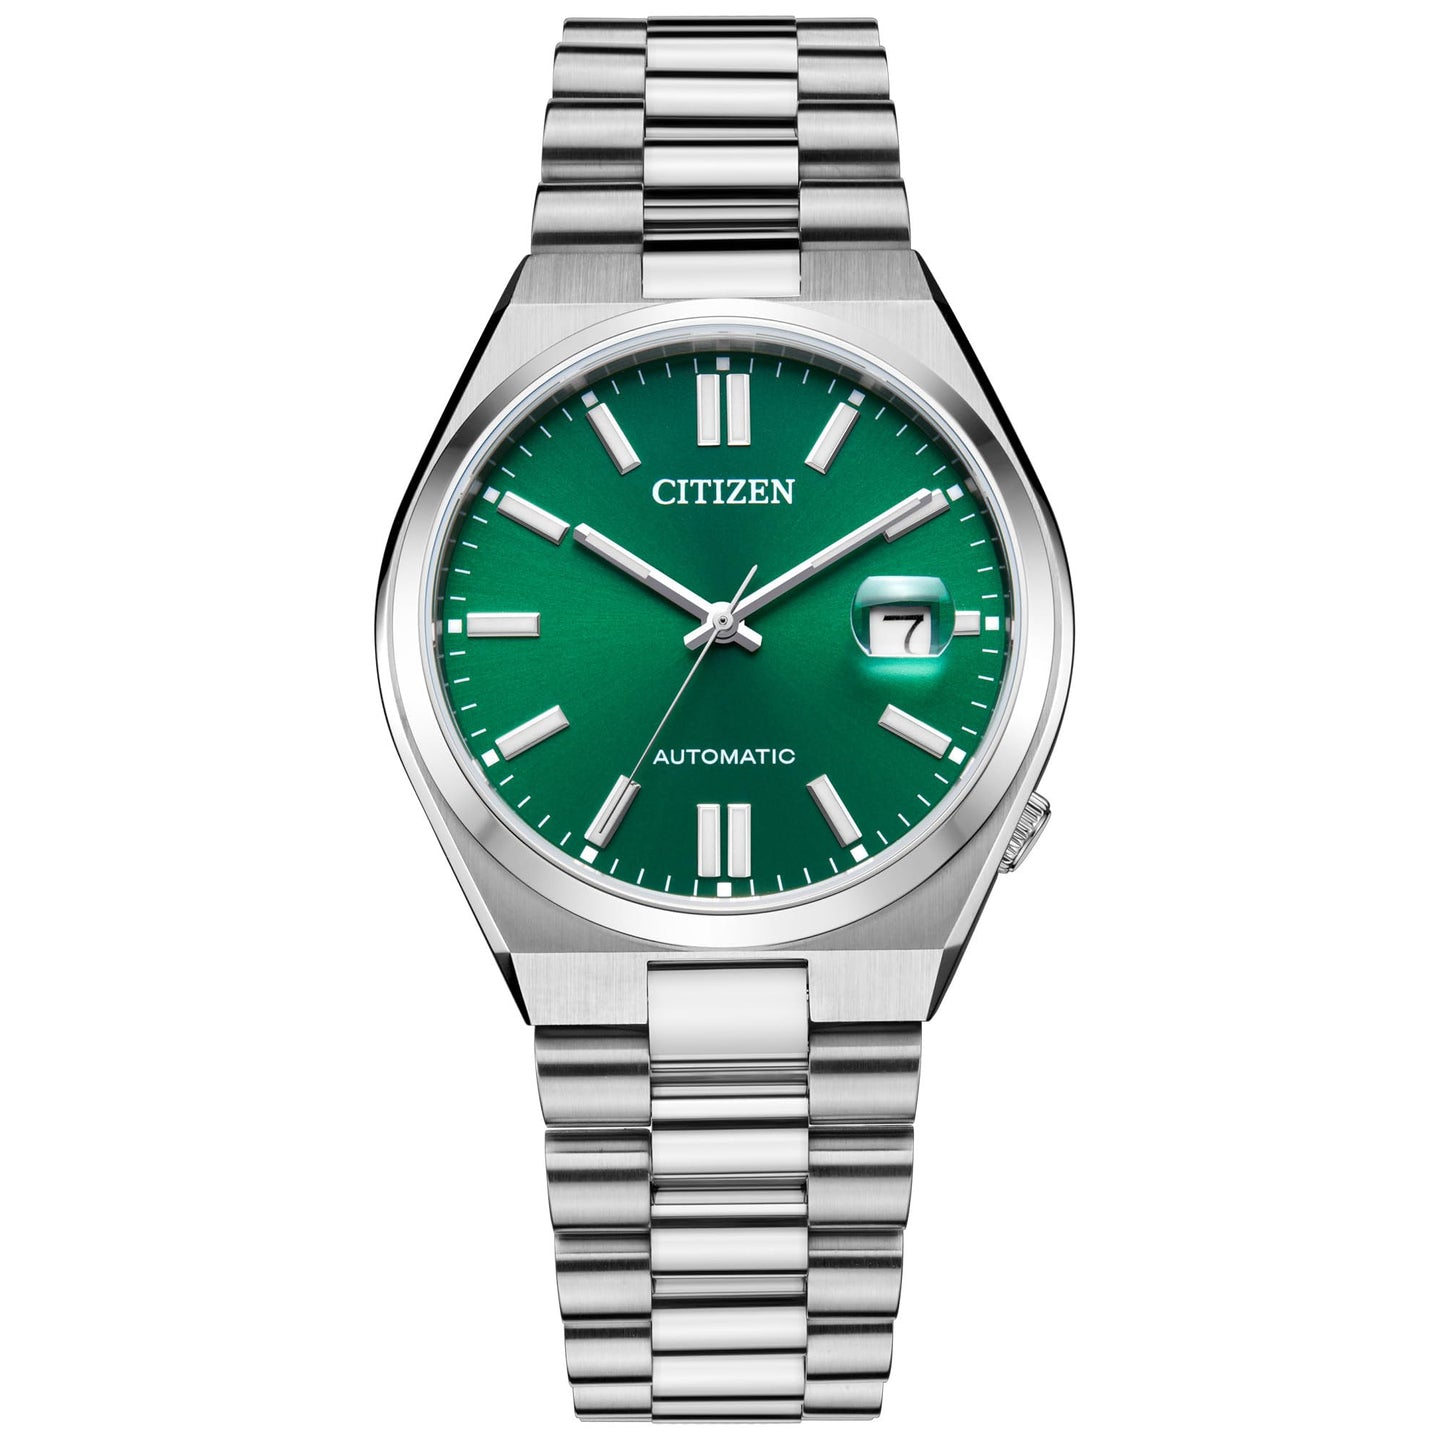 Citizen Eco-Drive Tsuyosa Green Dial and Stainless Steel Bracelet Watch 40mm NJ0150-56X, 5 1/2 inches